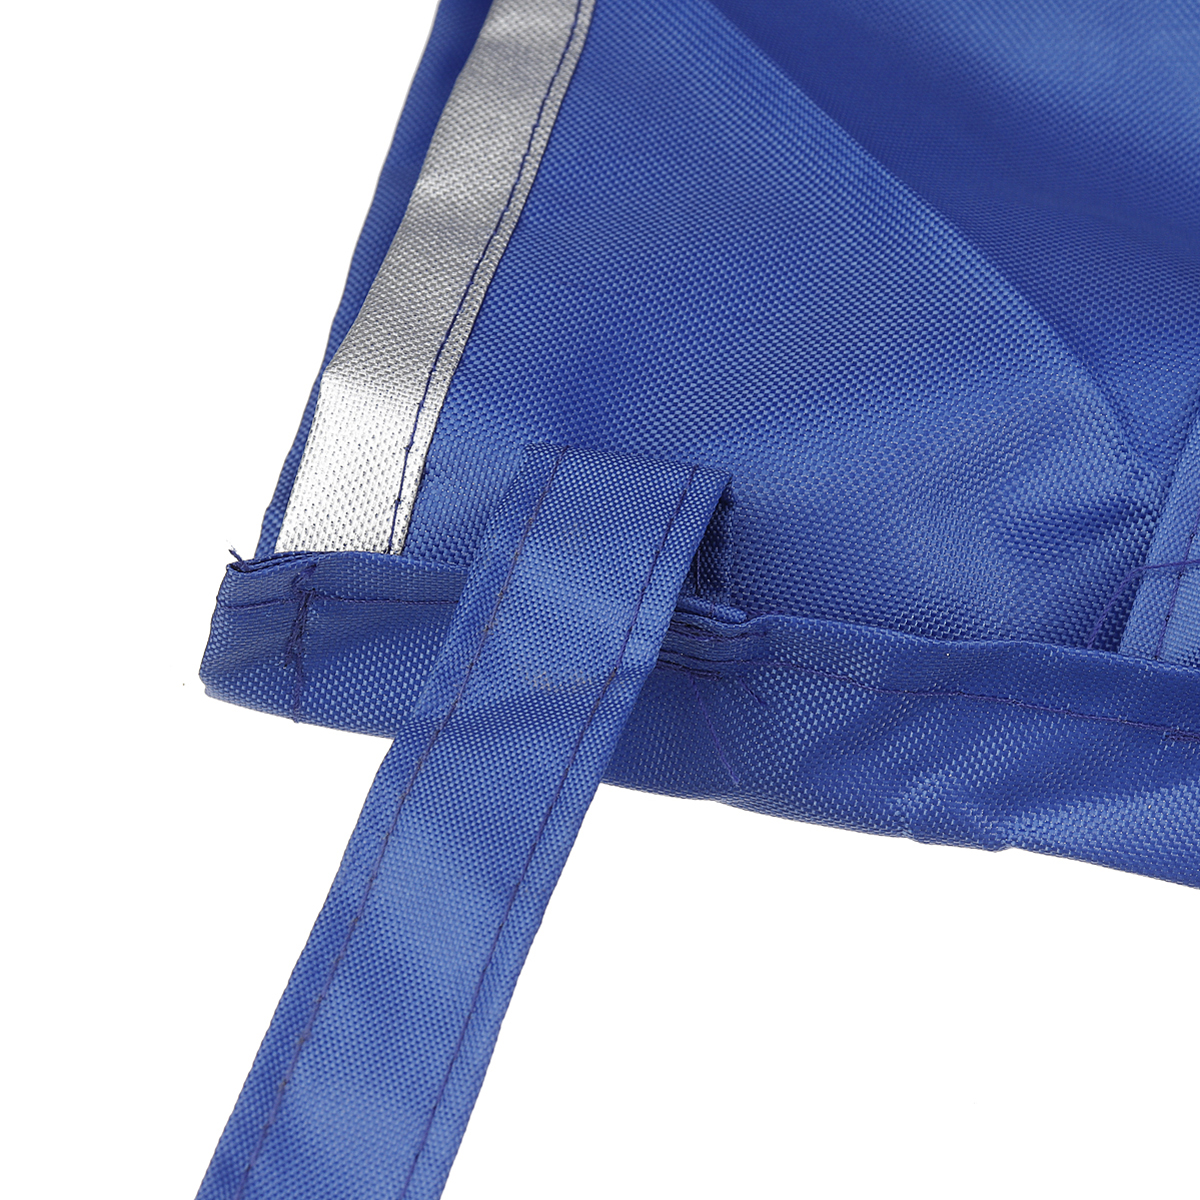 420D 9-10ft / 11-12ft / 12-13ft Mainsail Boom Cover Sail Protector Waterproof Fabric